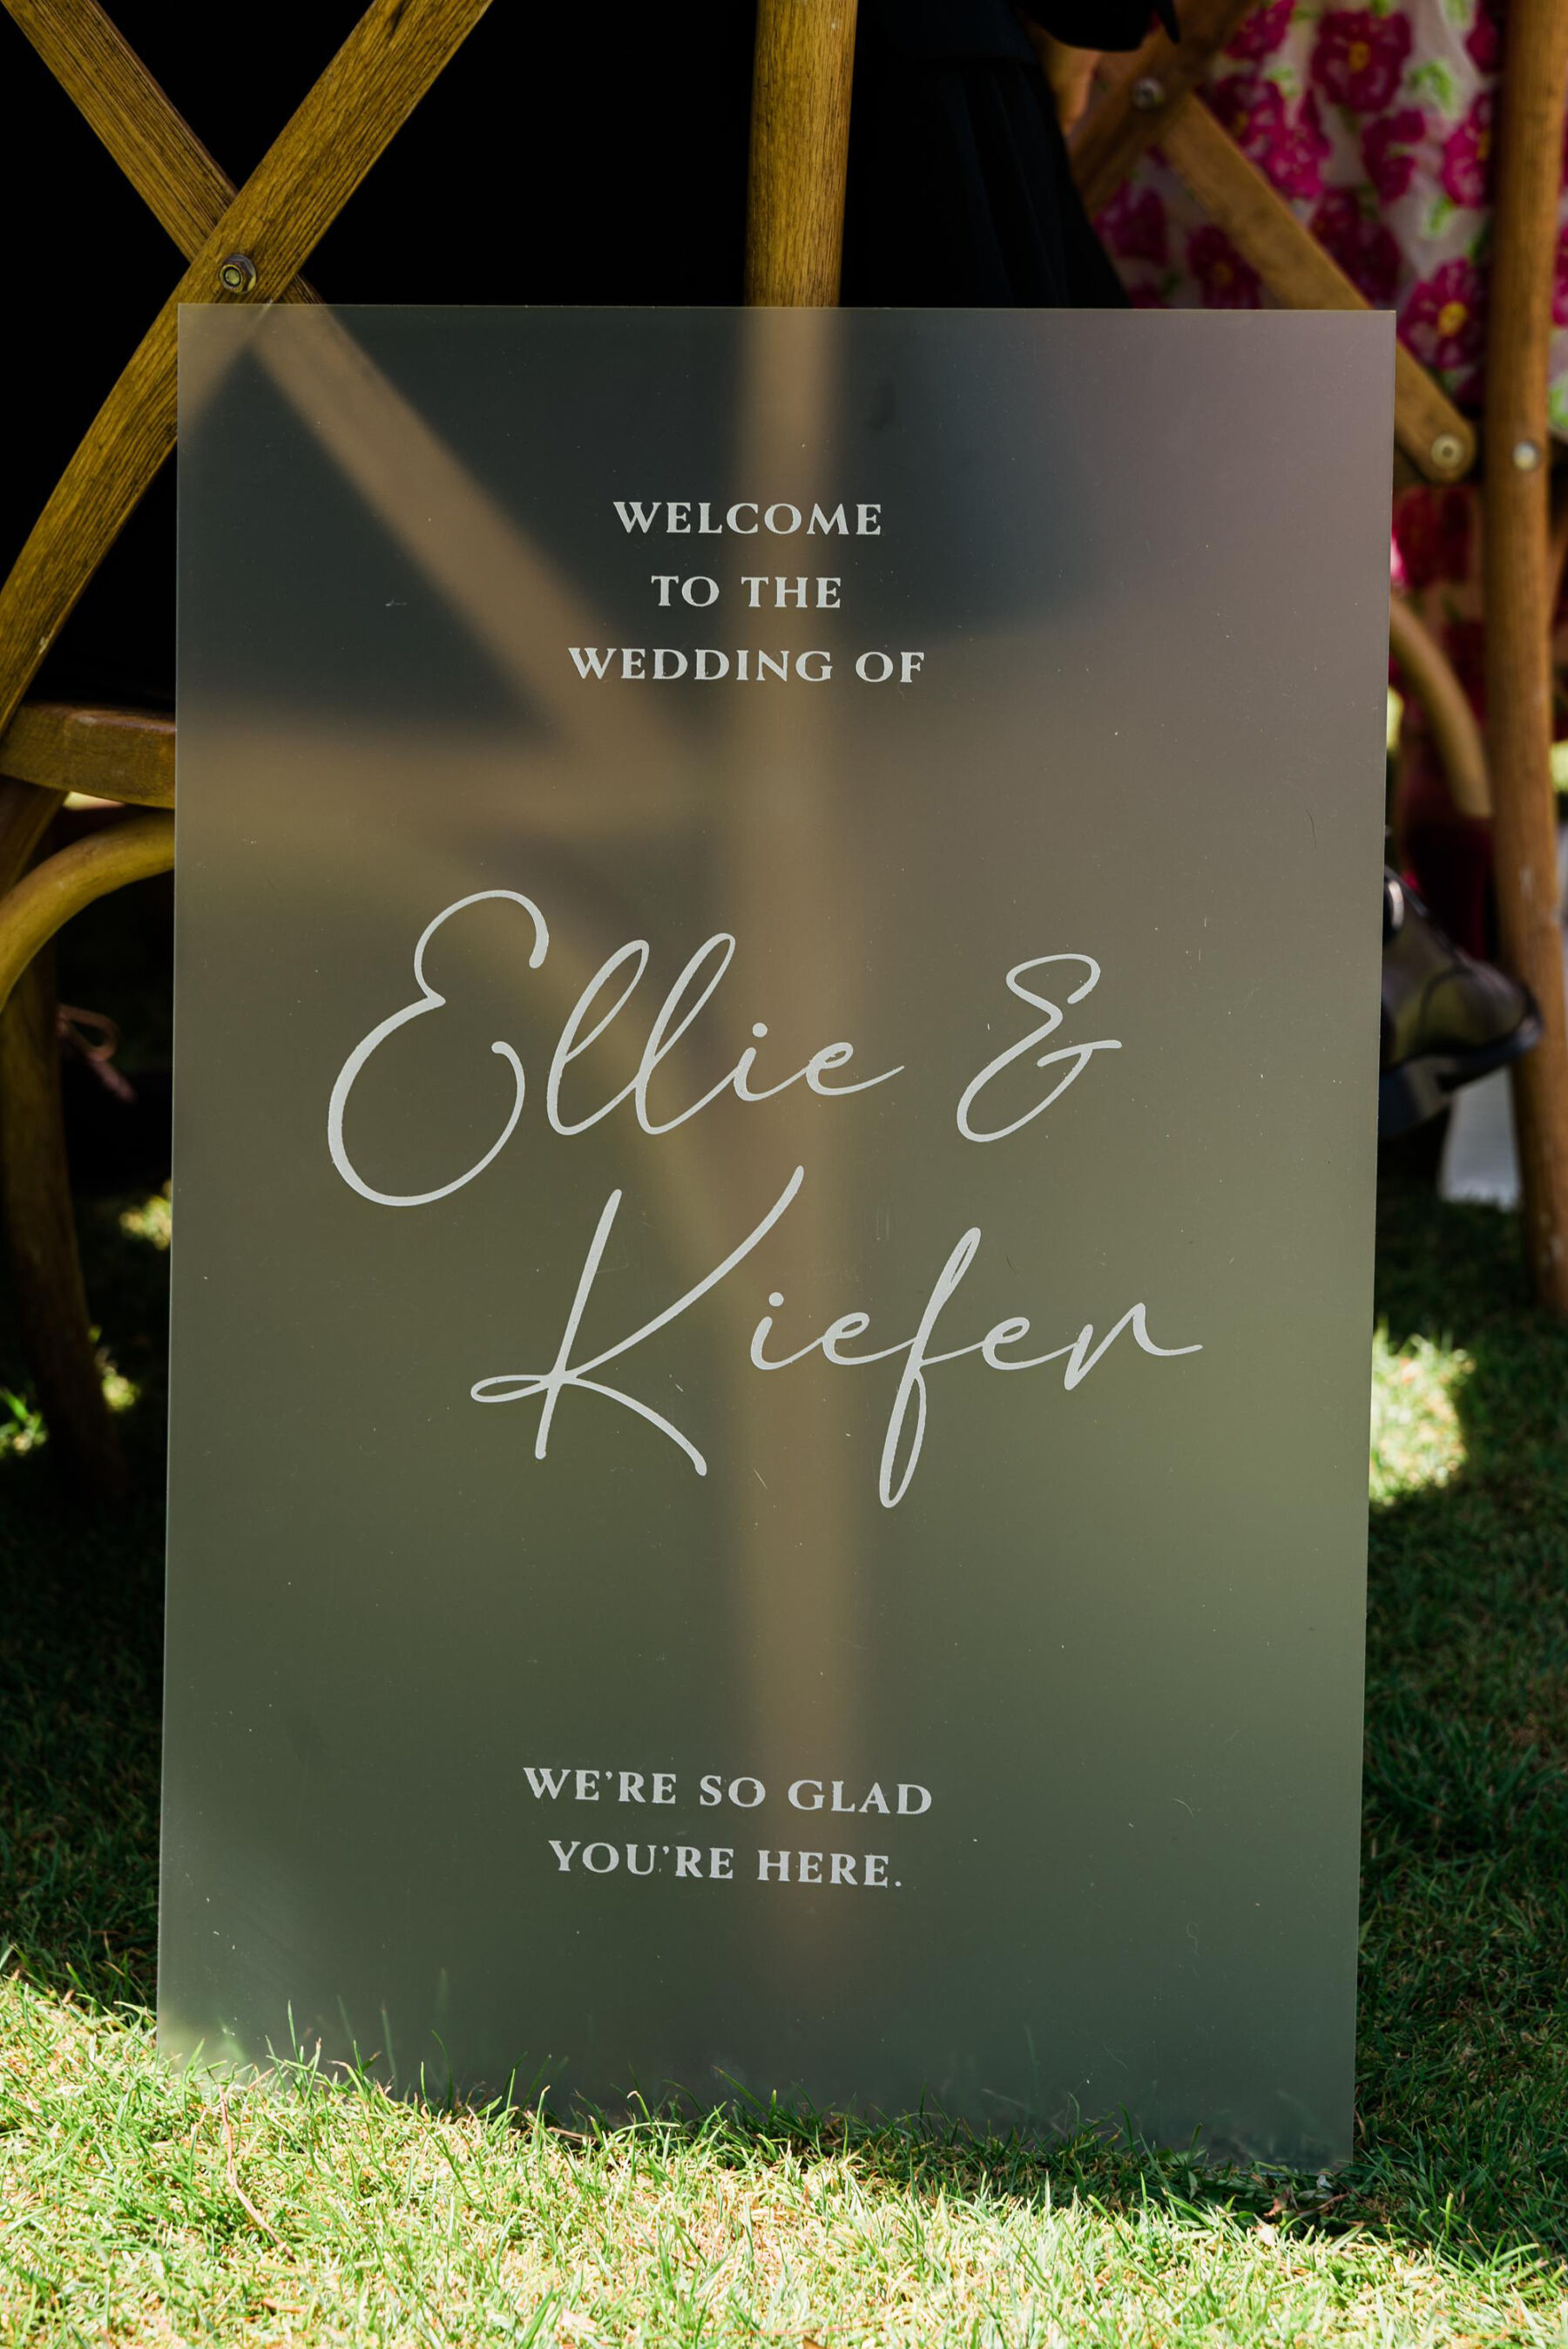 Perspex wedding sign greeting guests